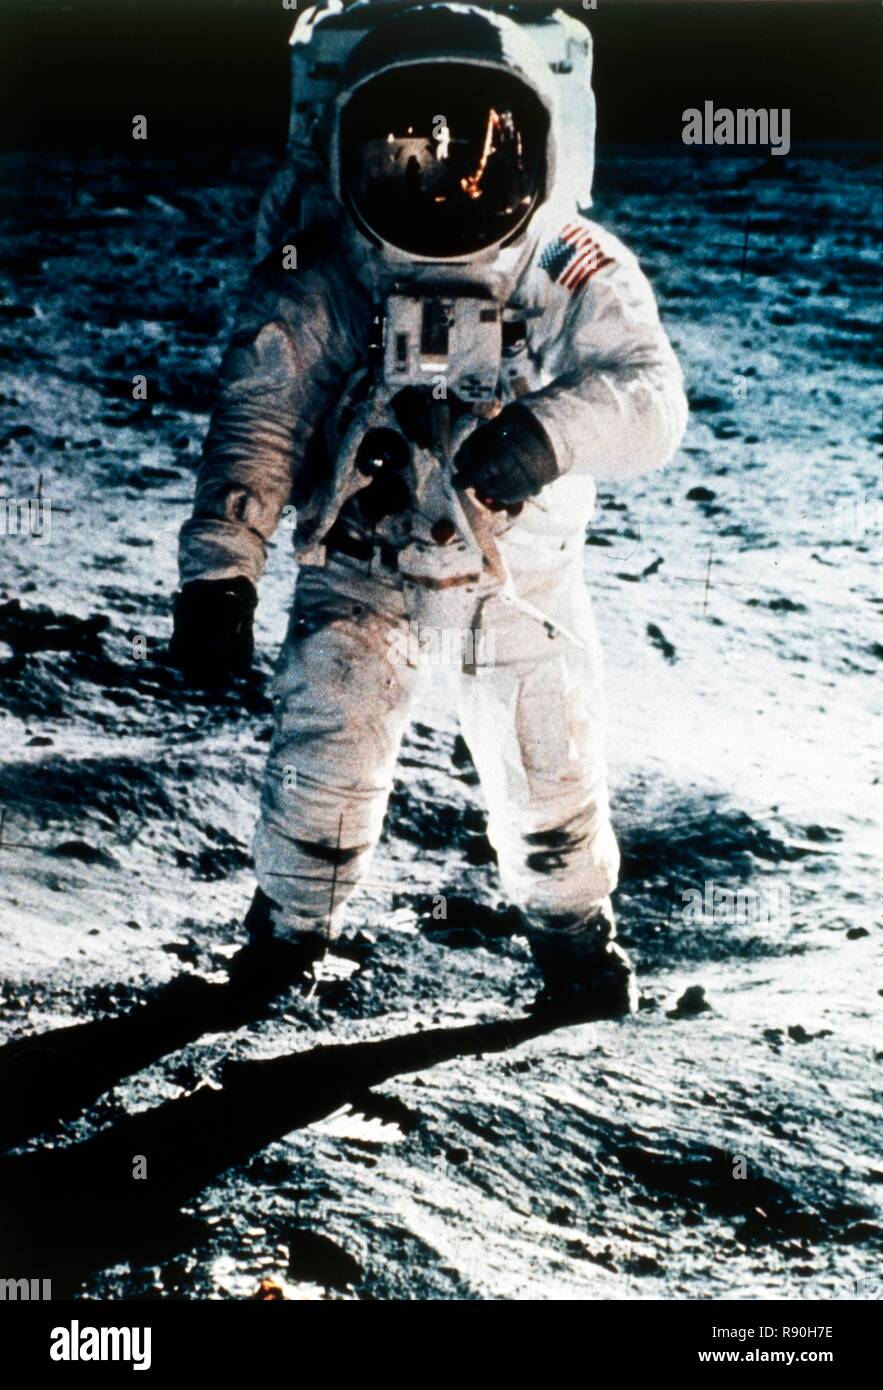 Buzz Aldrin on the Moon, Apollo II mission, July 1969.  Creator: Neil Armstrong. Stock Photo